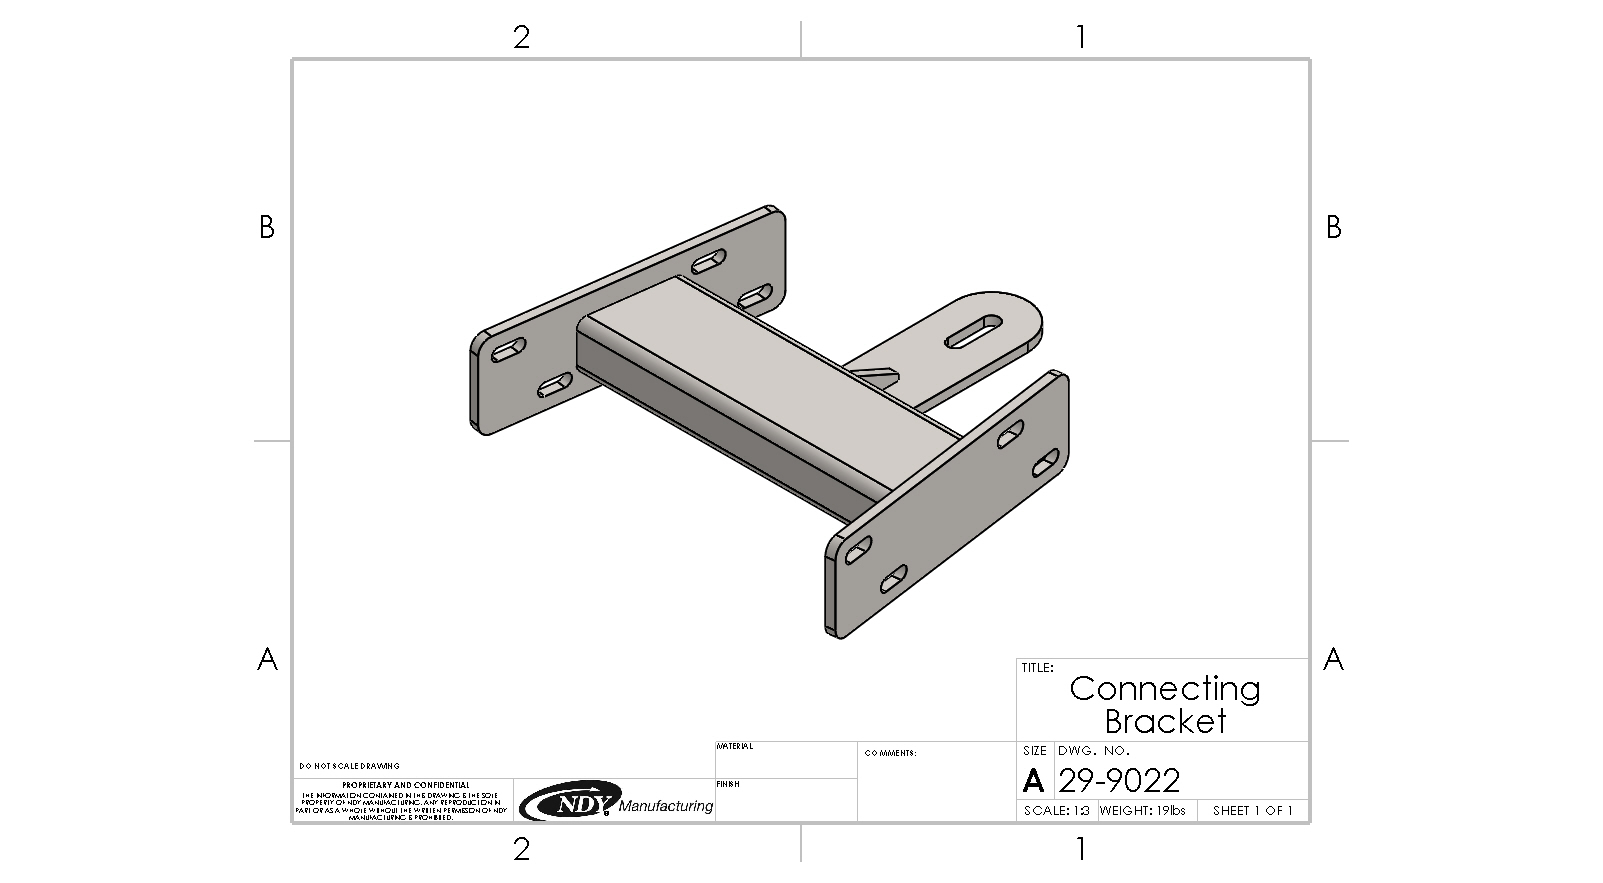 A drawing of a Rock Box Connecting Bracket.